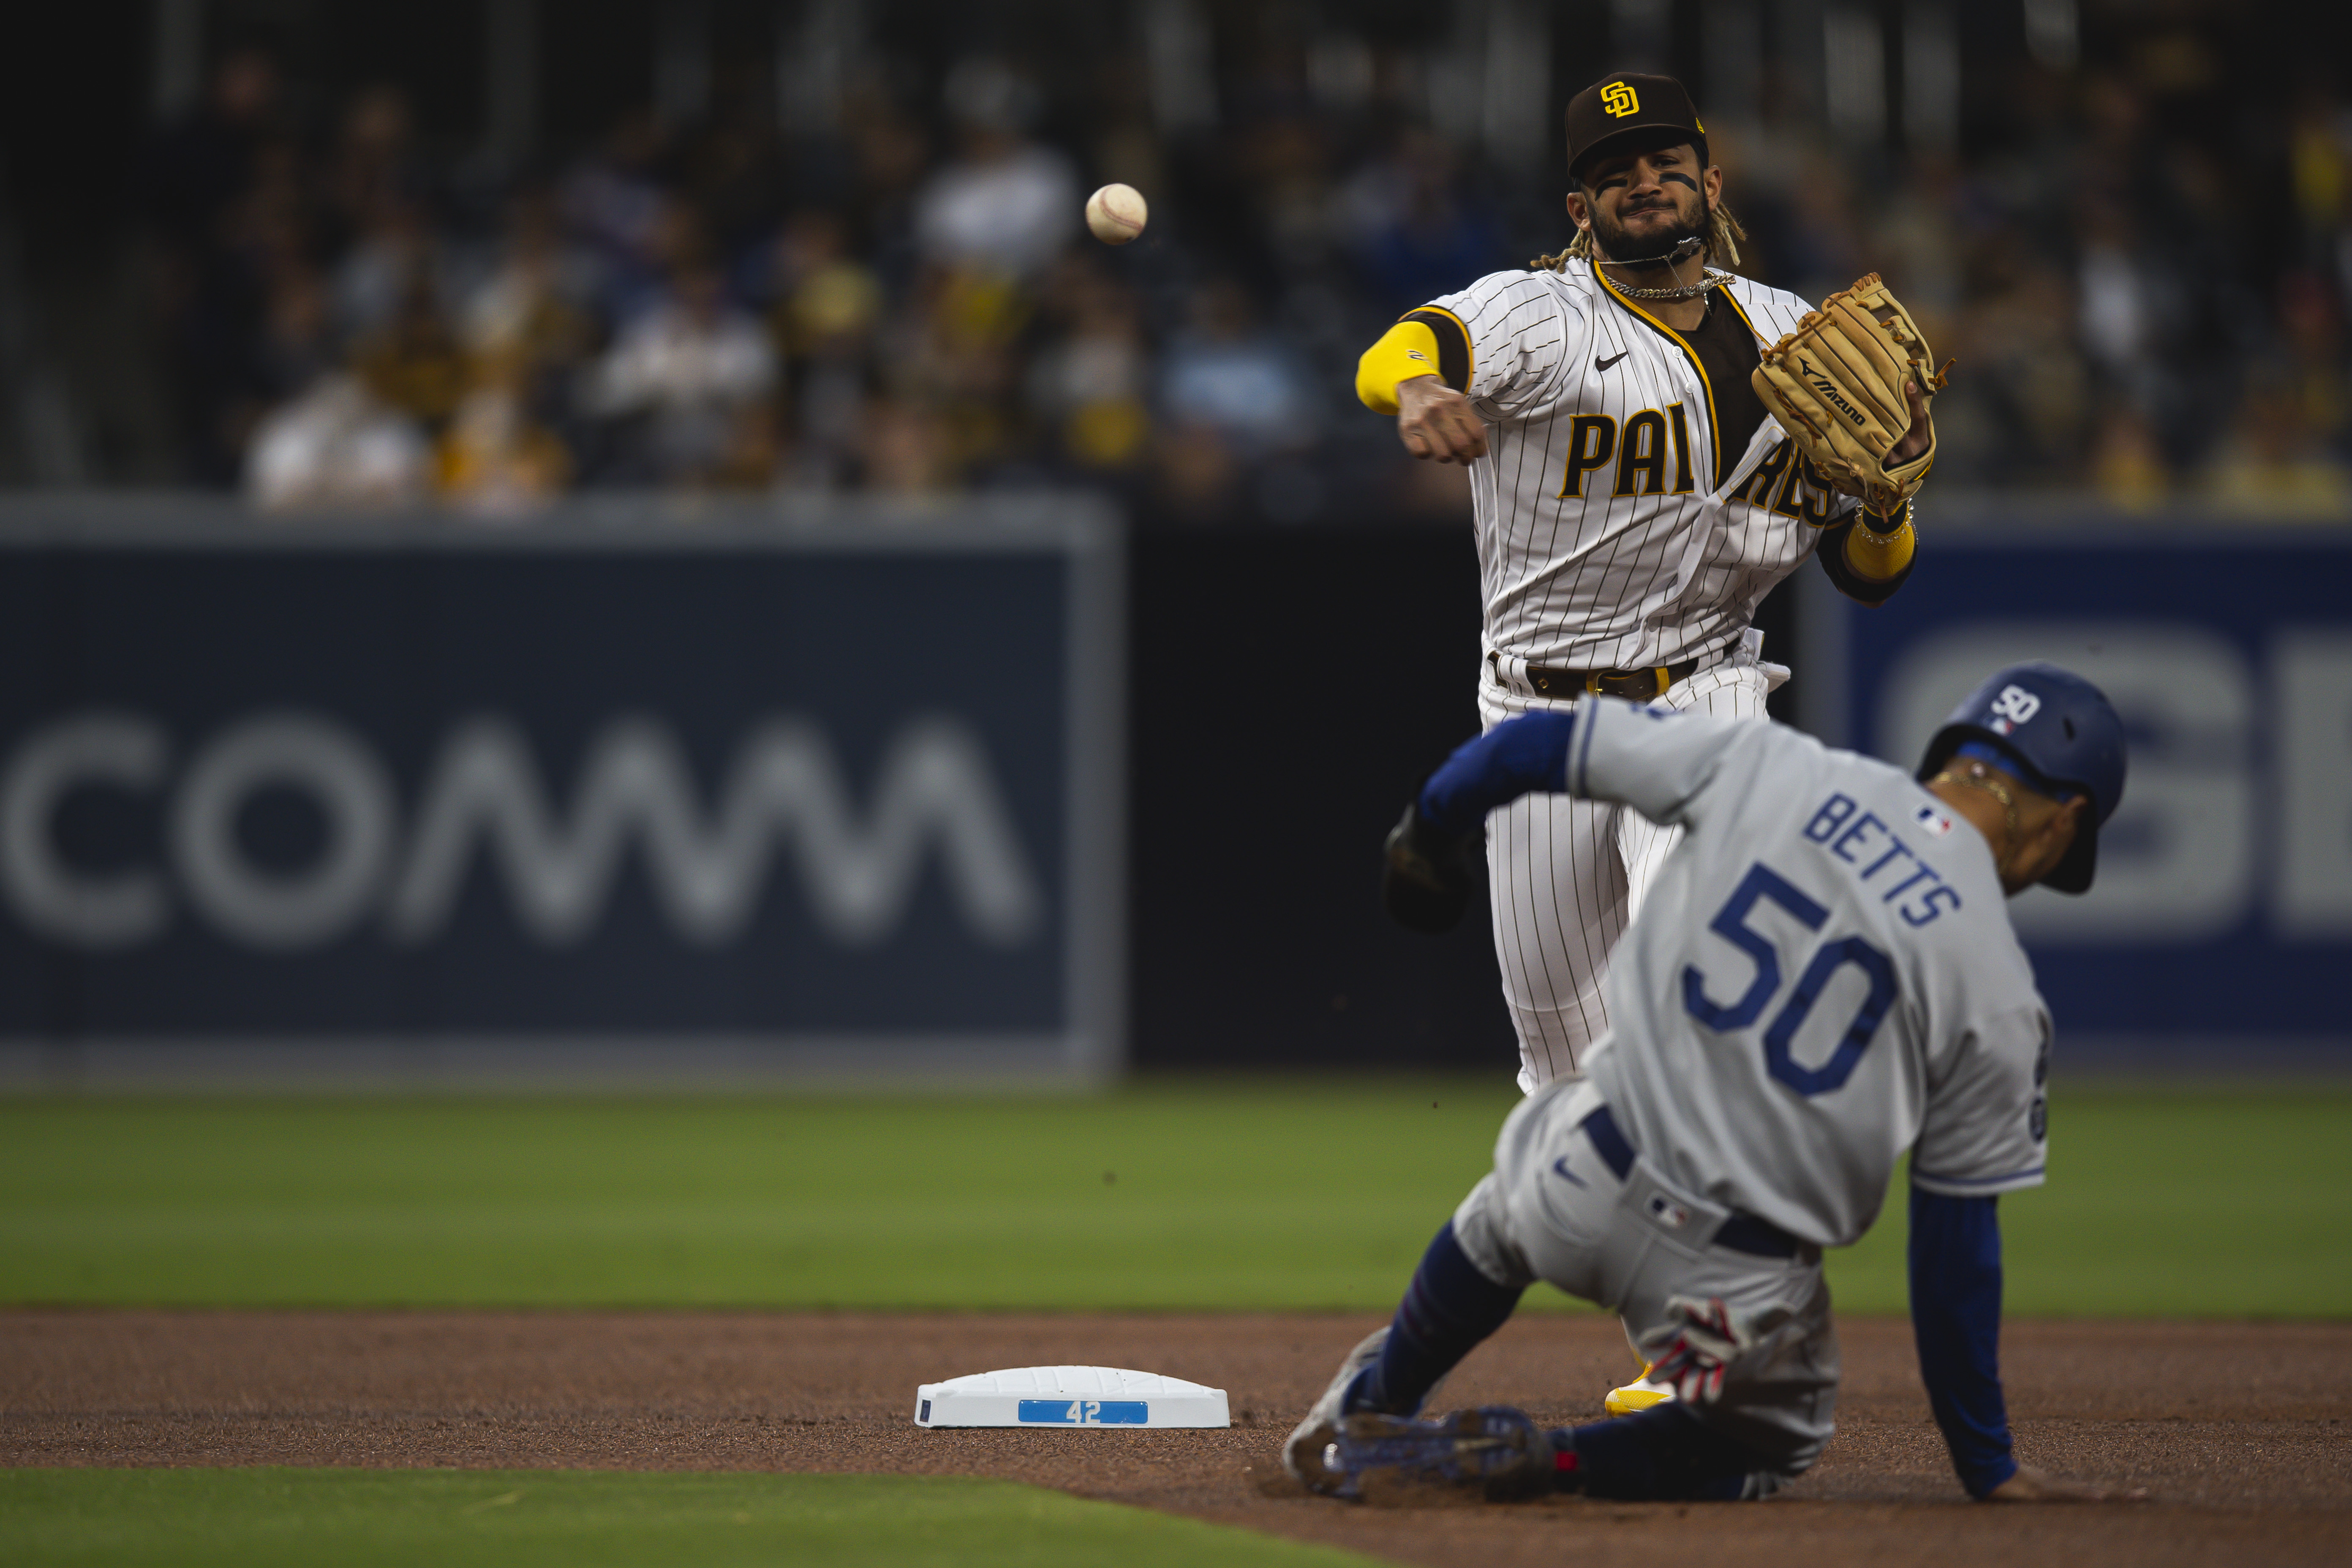 Dodgers too strong again in shutout of Padres